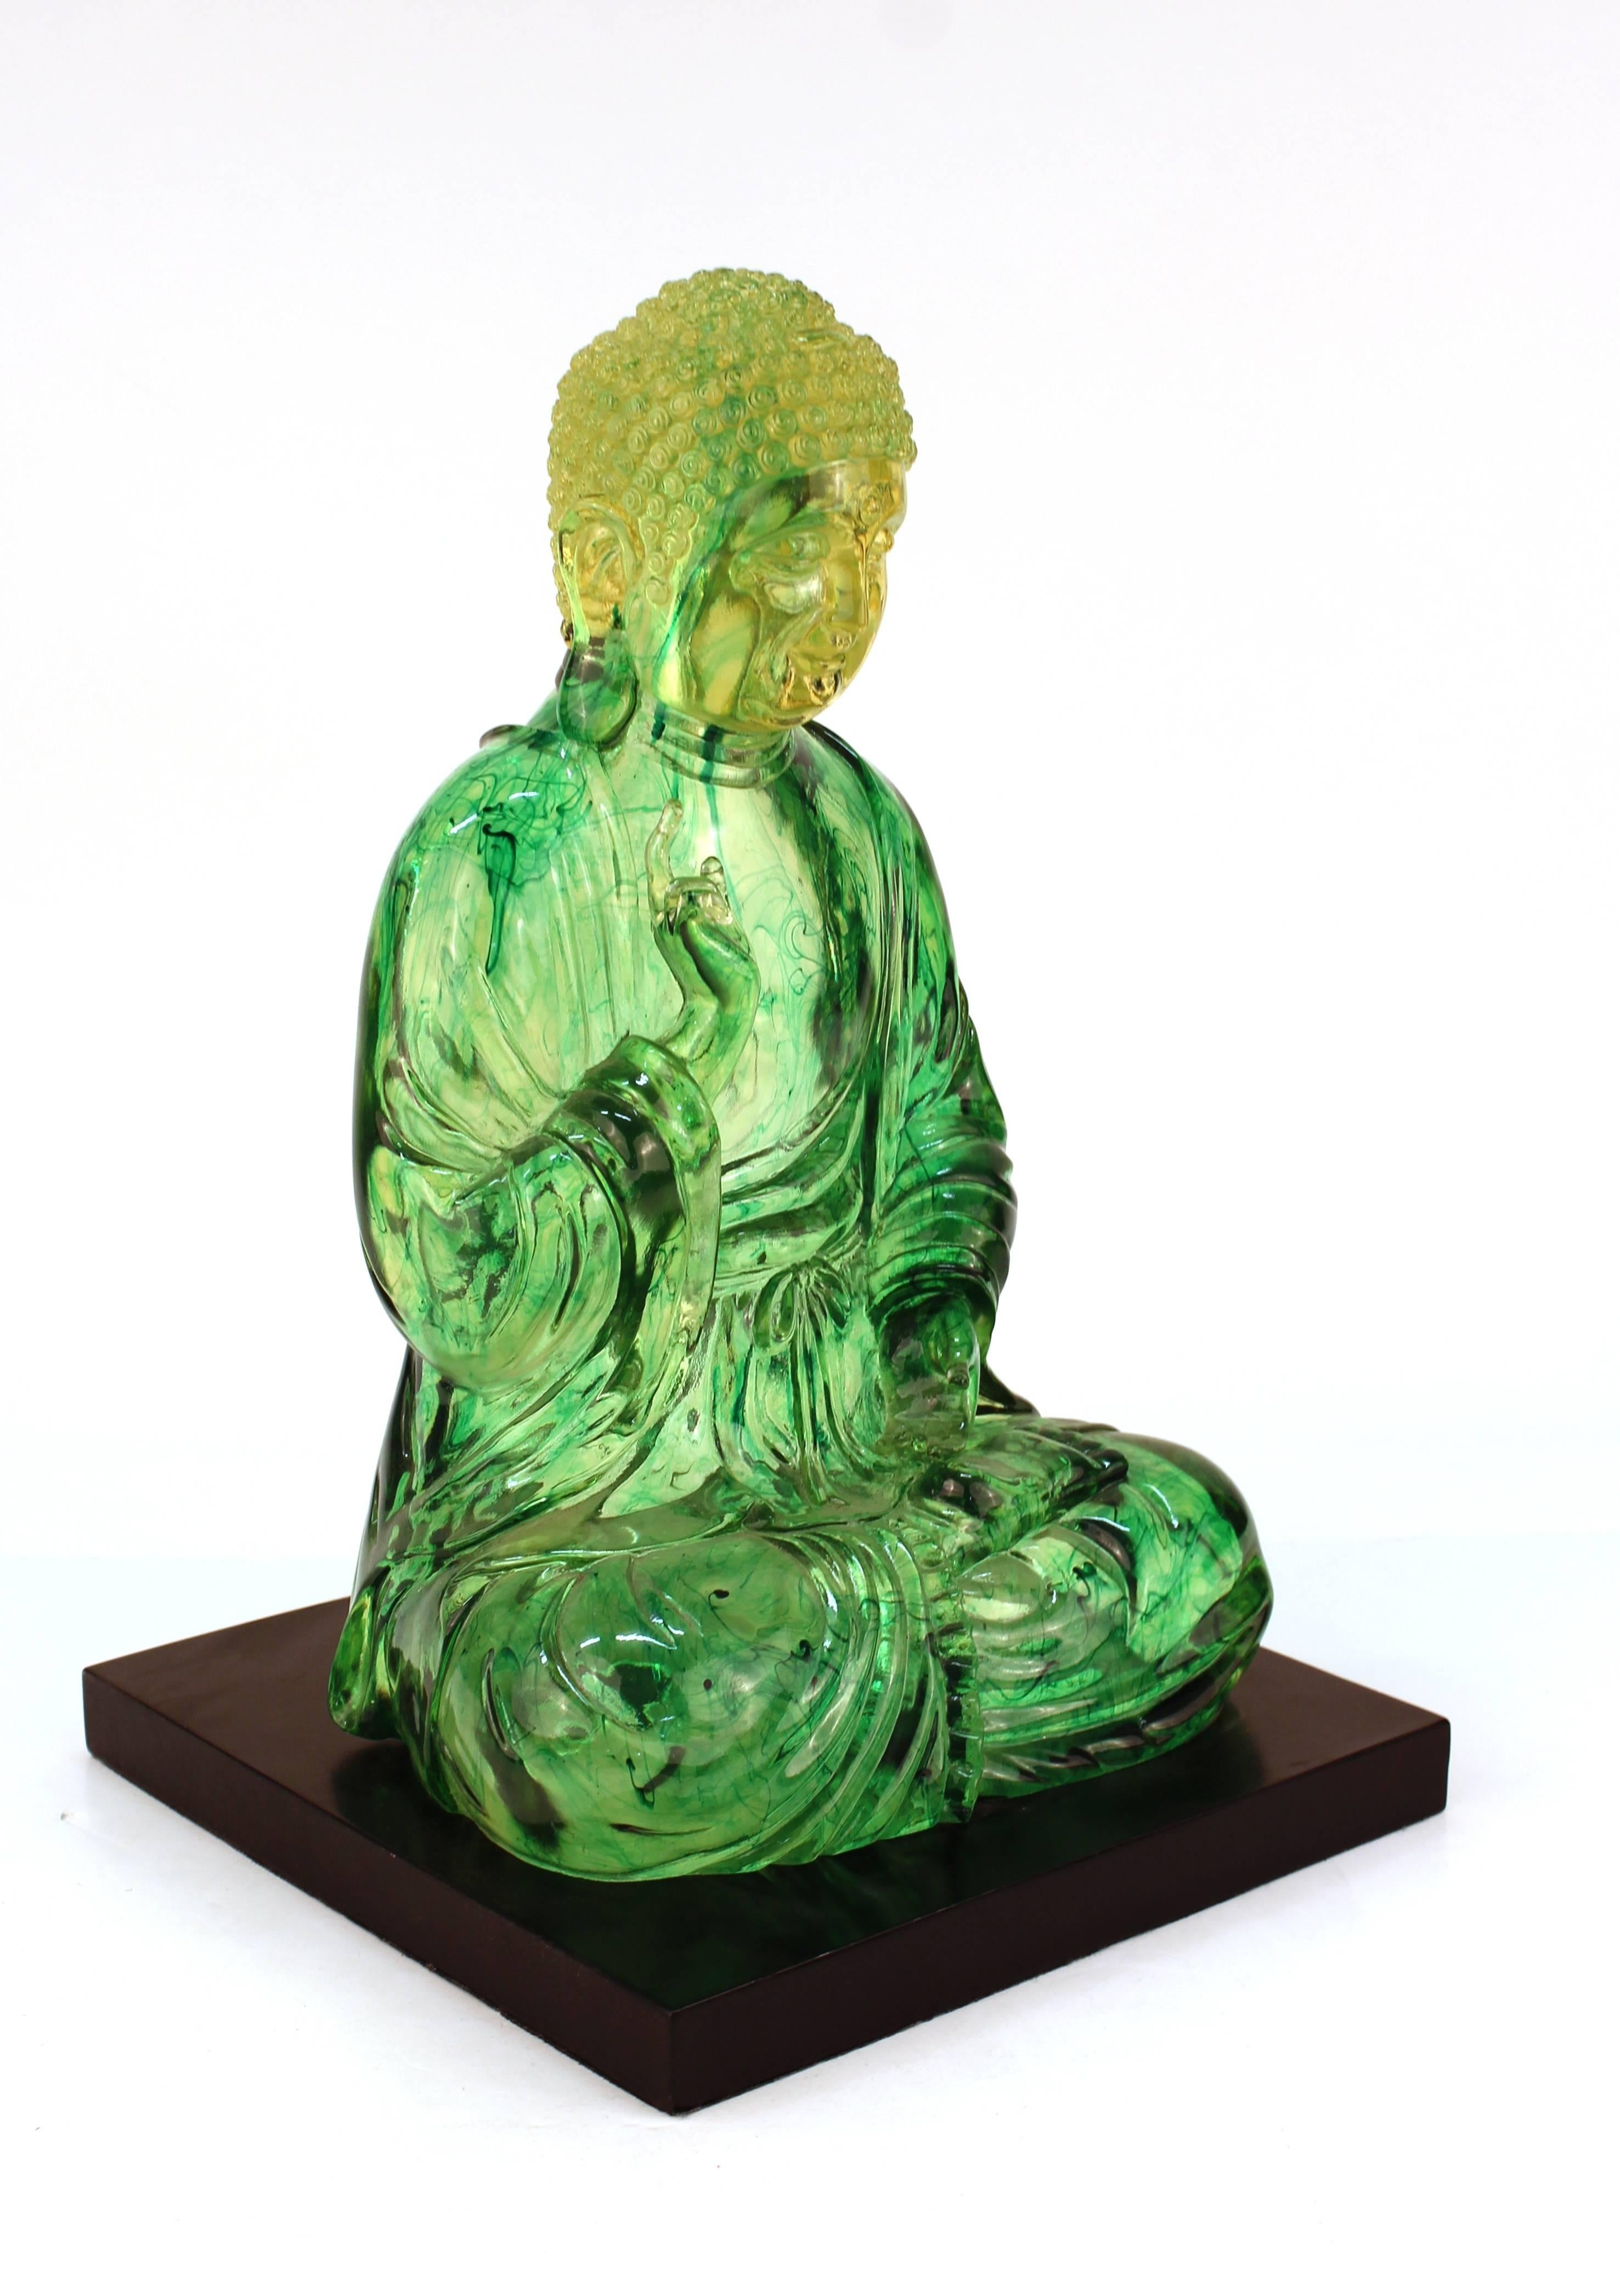 Buddha sculpture from the mid-20th century. Crafted with clear resin in yellow to green ombre with dark green inclusions throughout. The sculpture sits on a square base with glossy black finish. Wear appropriate to age and use. The piece remains in